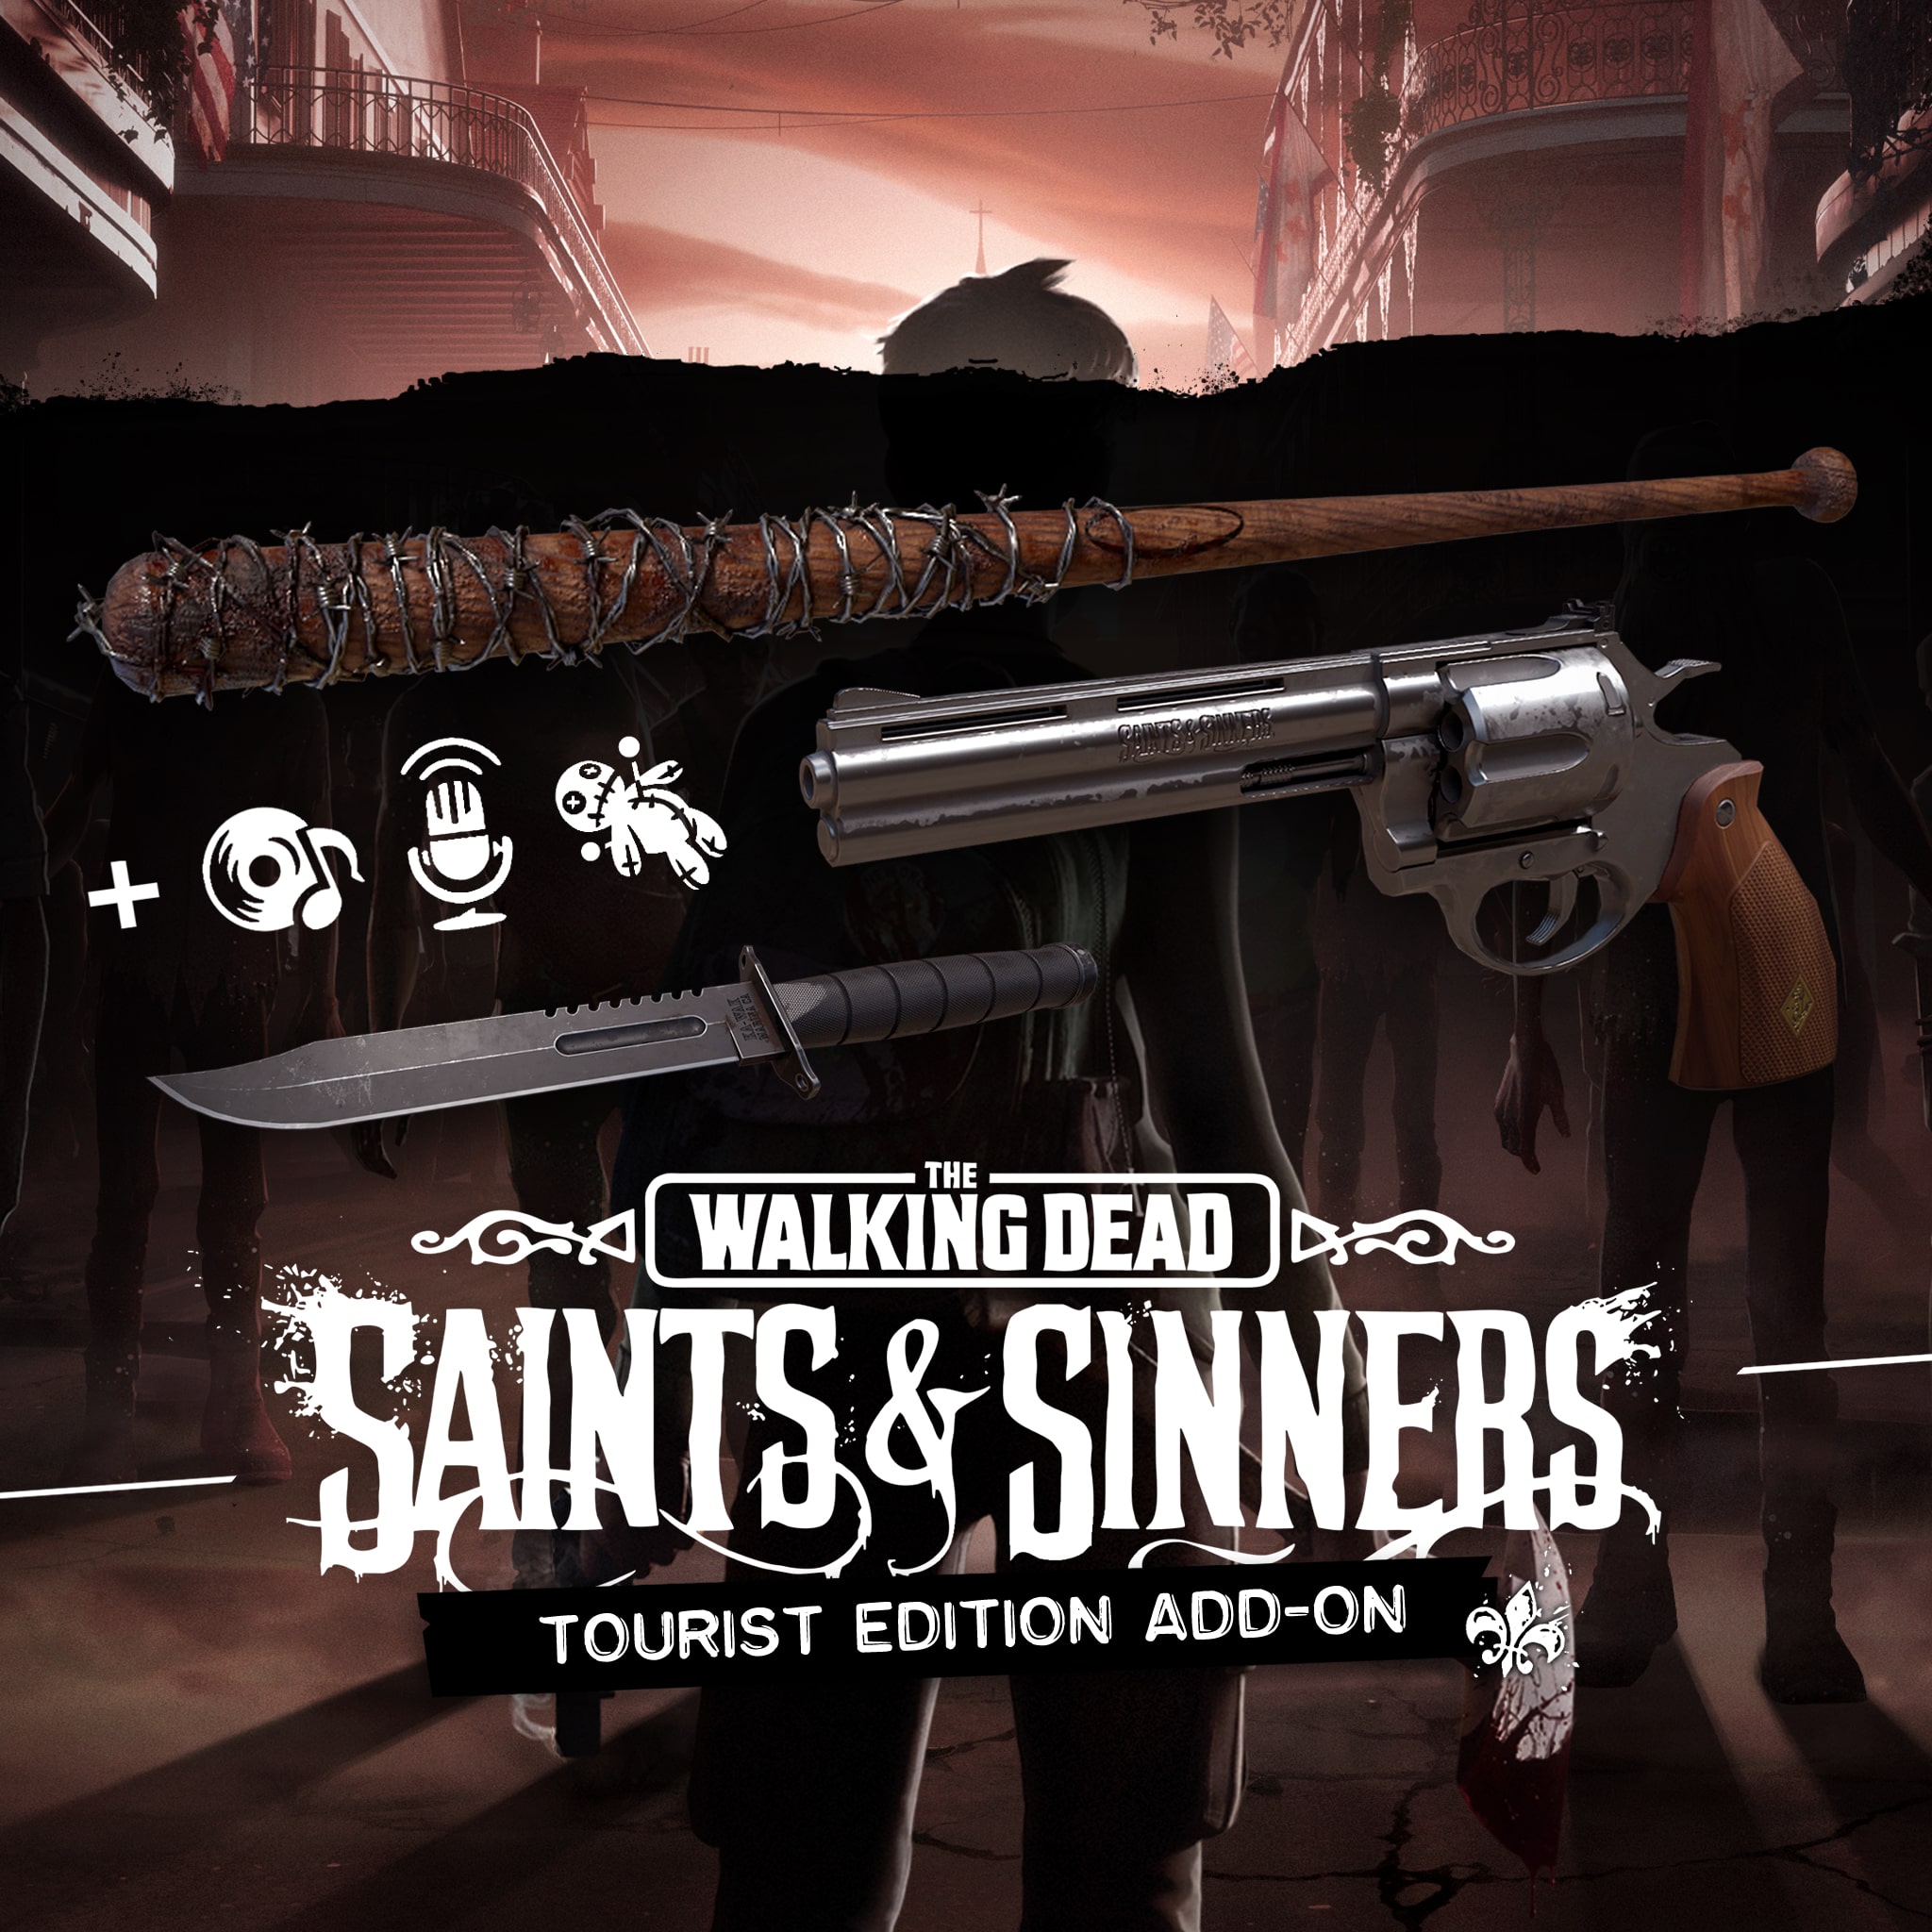 ps4 the walking dead saints and sinners